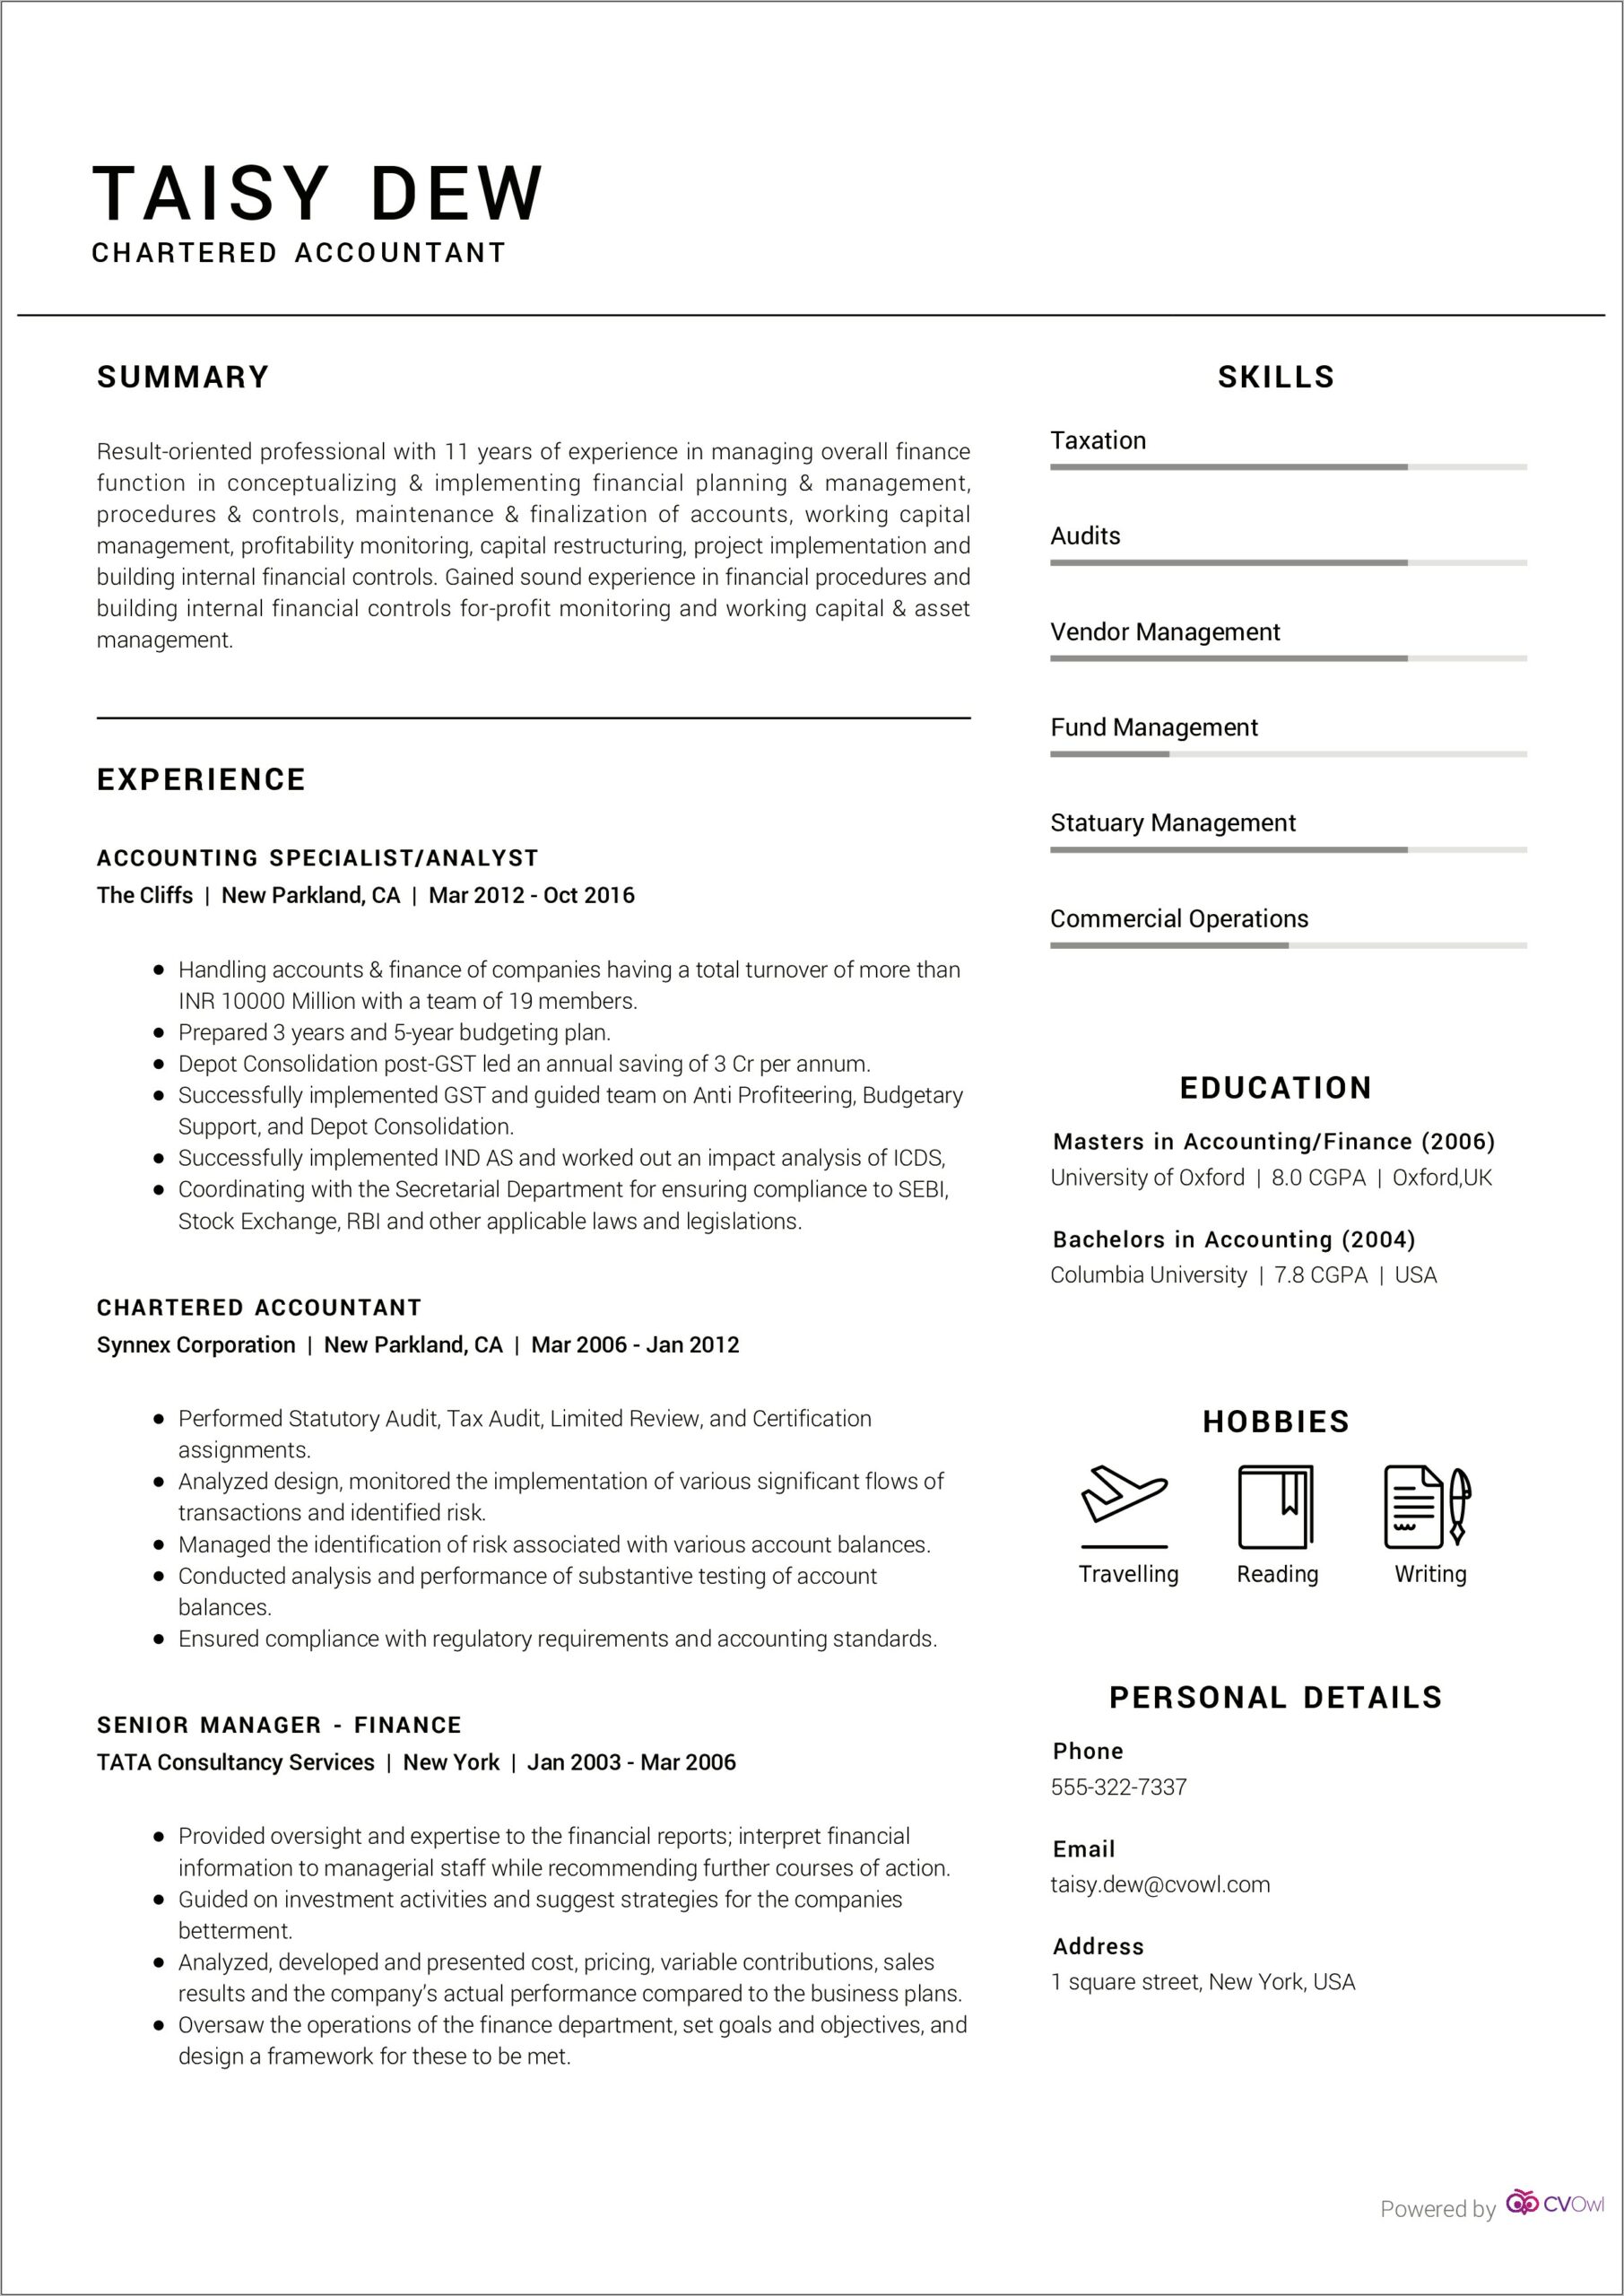 Sample Resume For Chartered Accountant Articleship